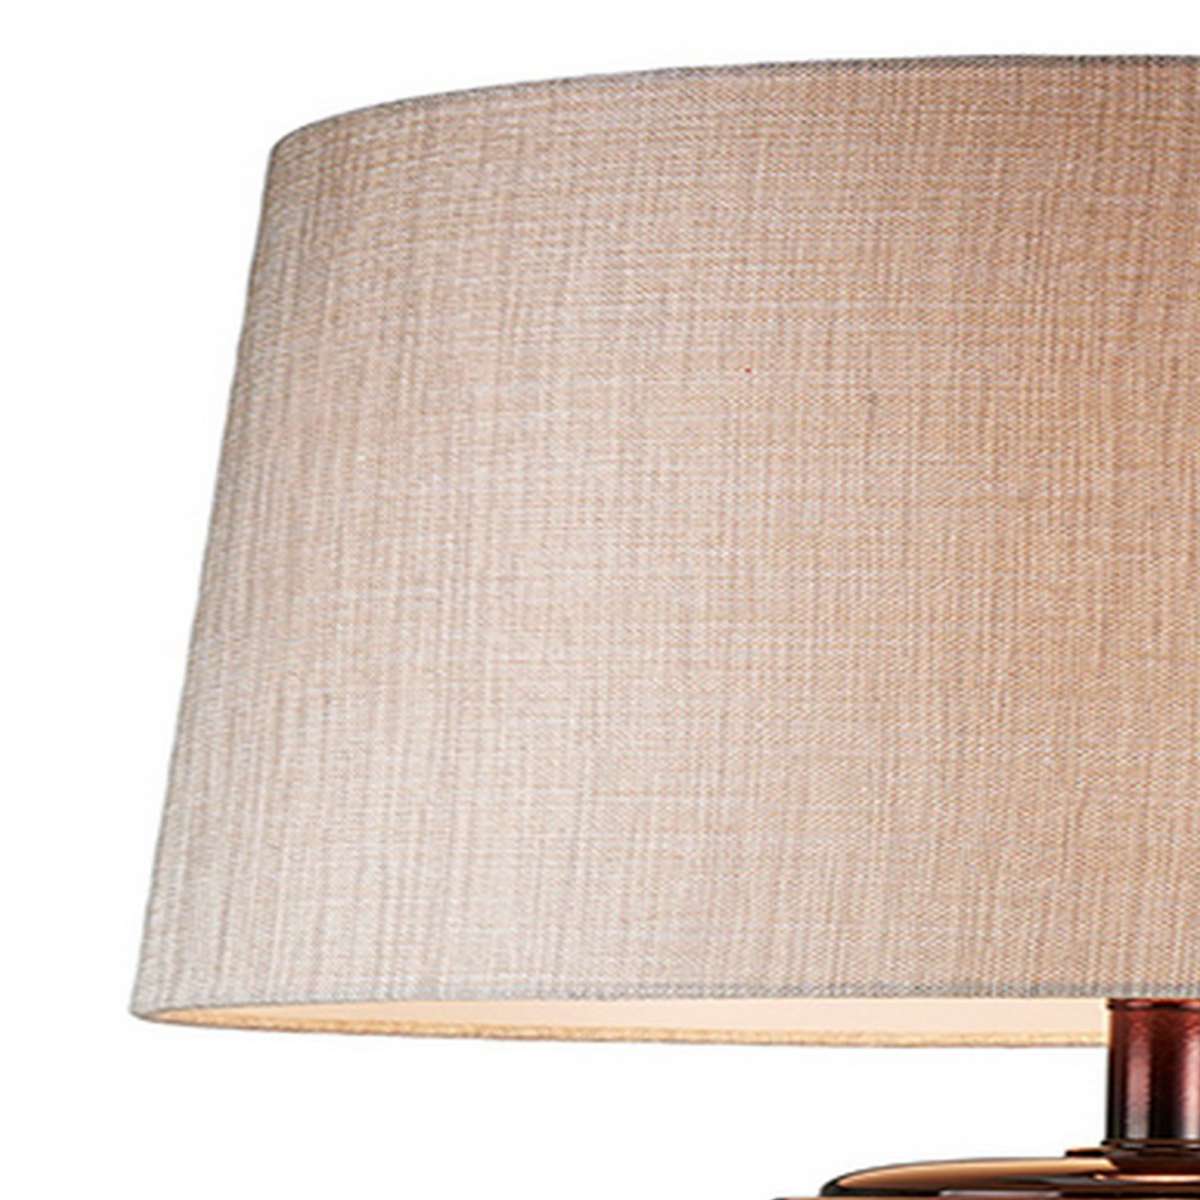 Table Lamp With Colorblock Pedestal Base, Brown By Benzara